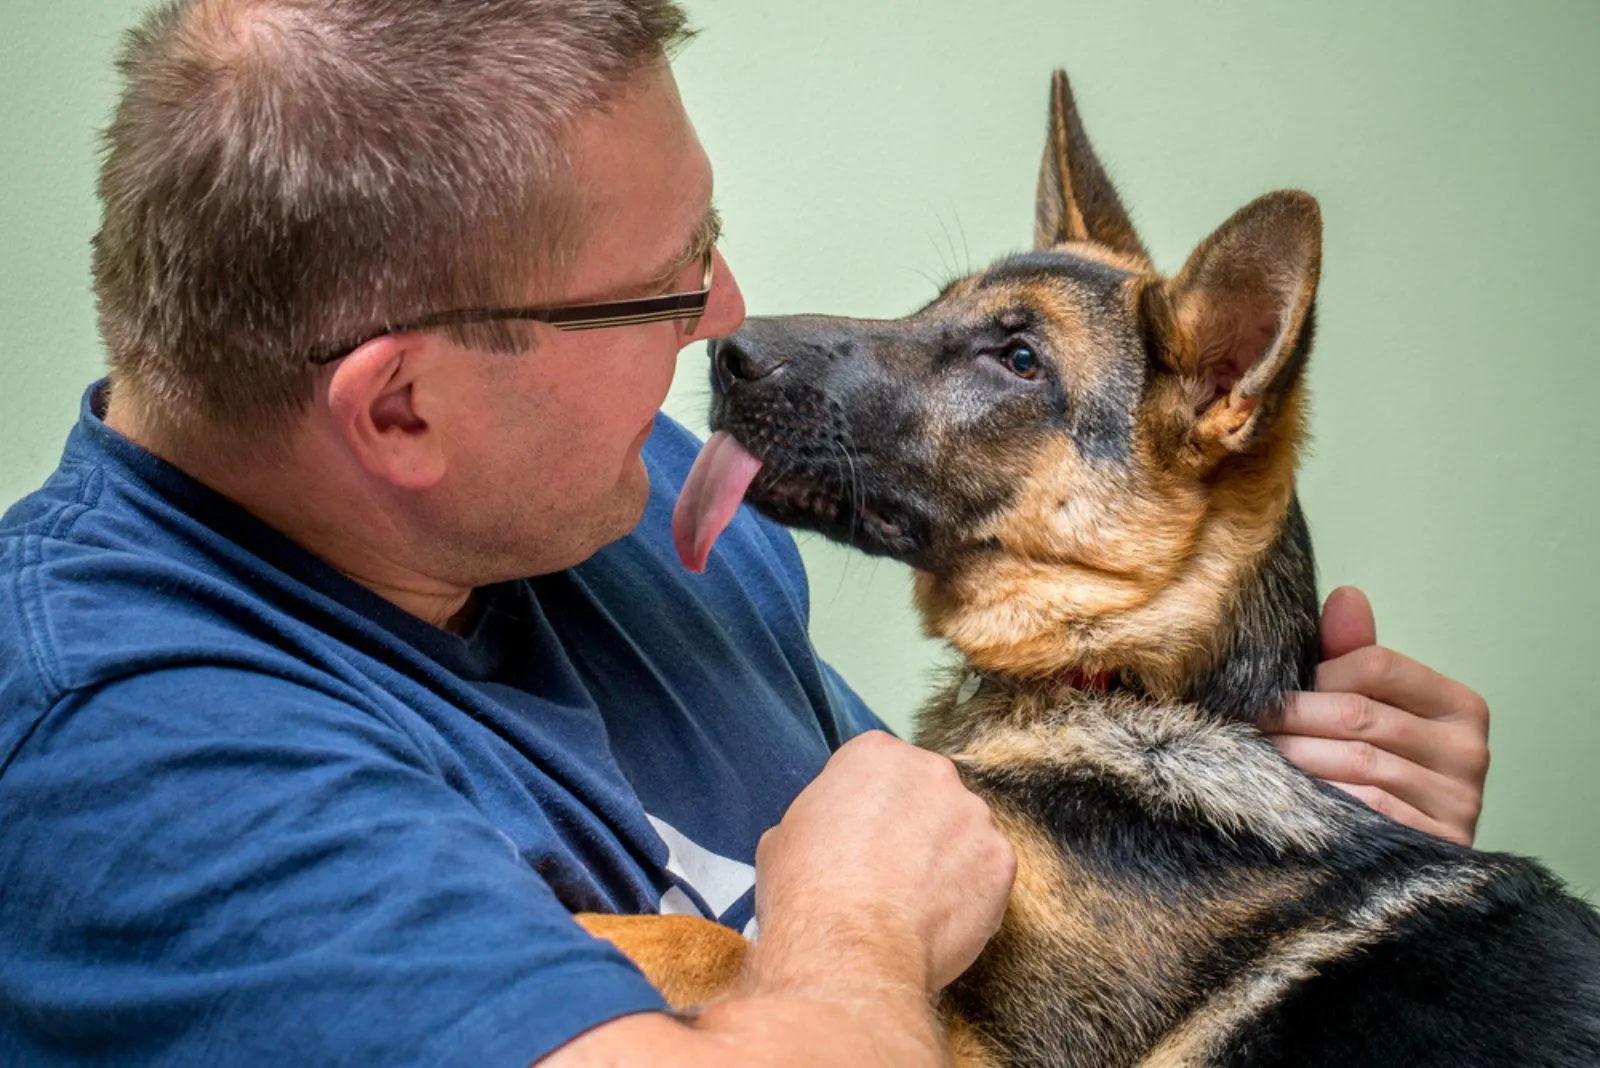 german shepherd dog sitting in owner's arms and licking him